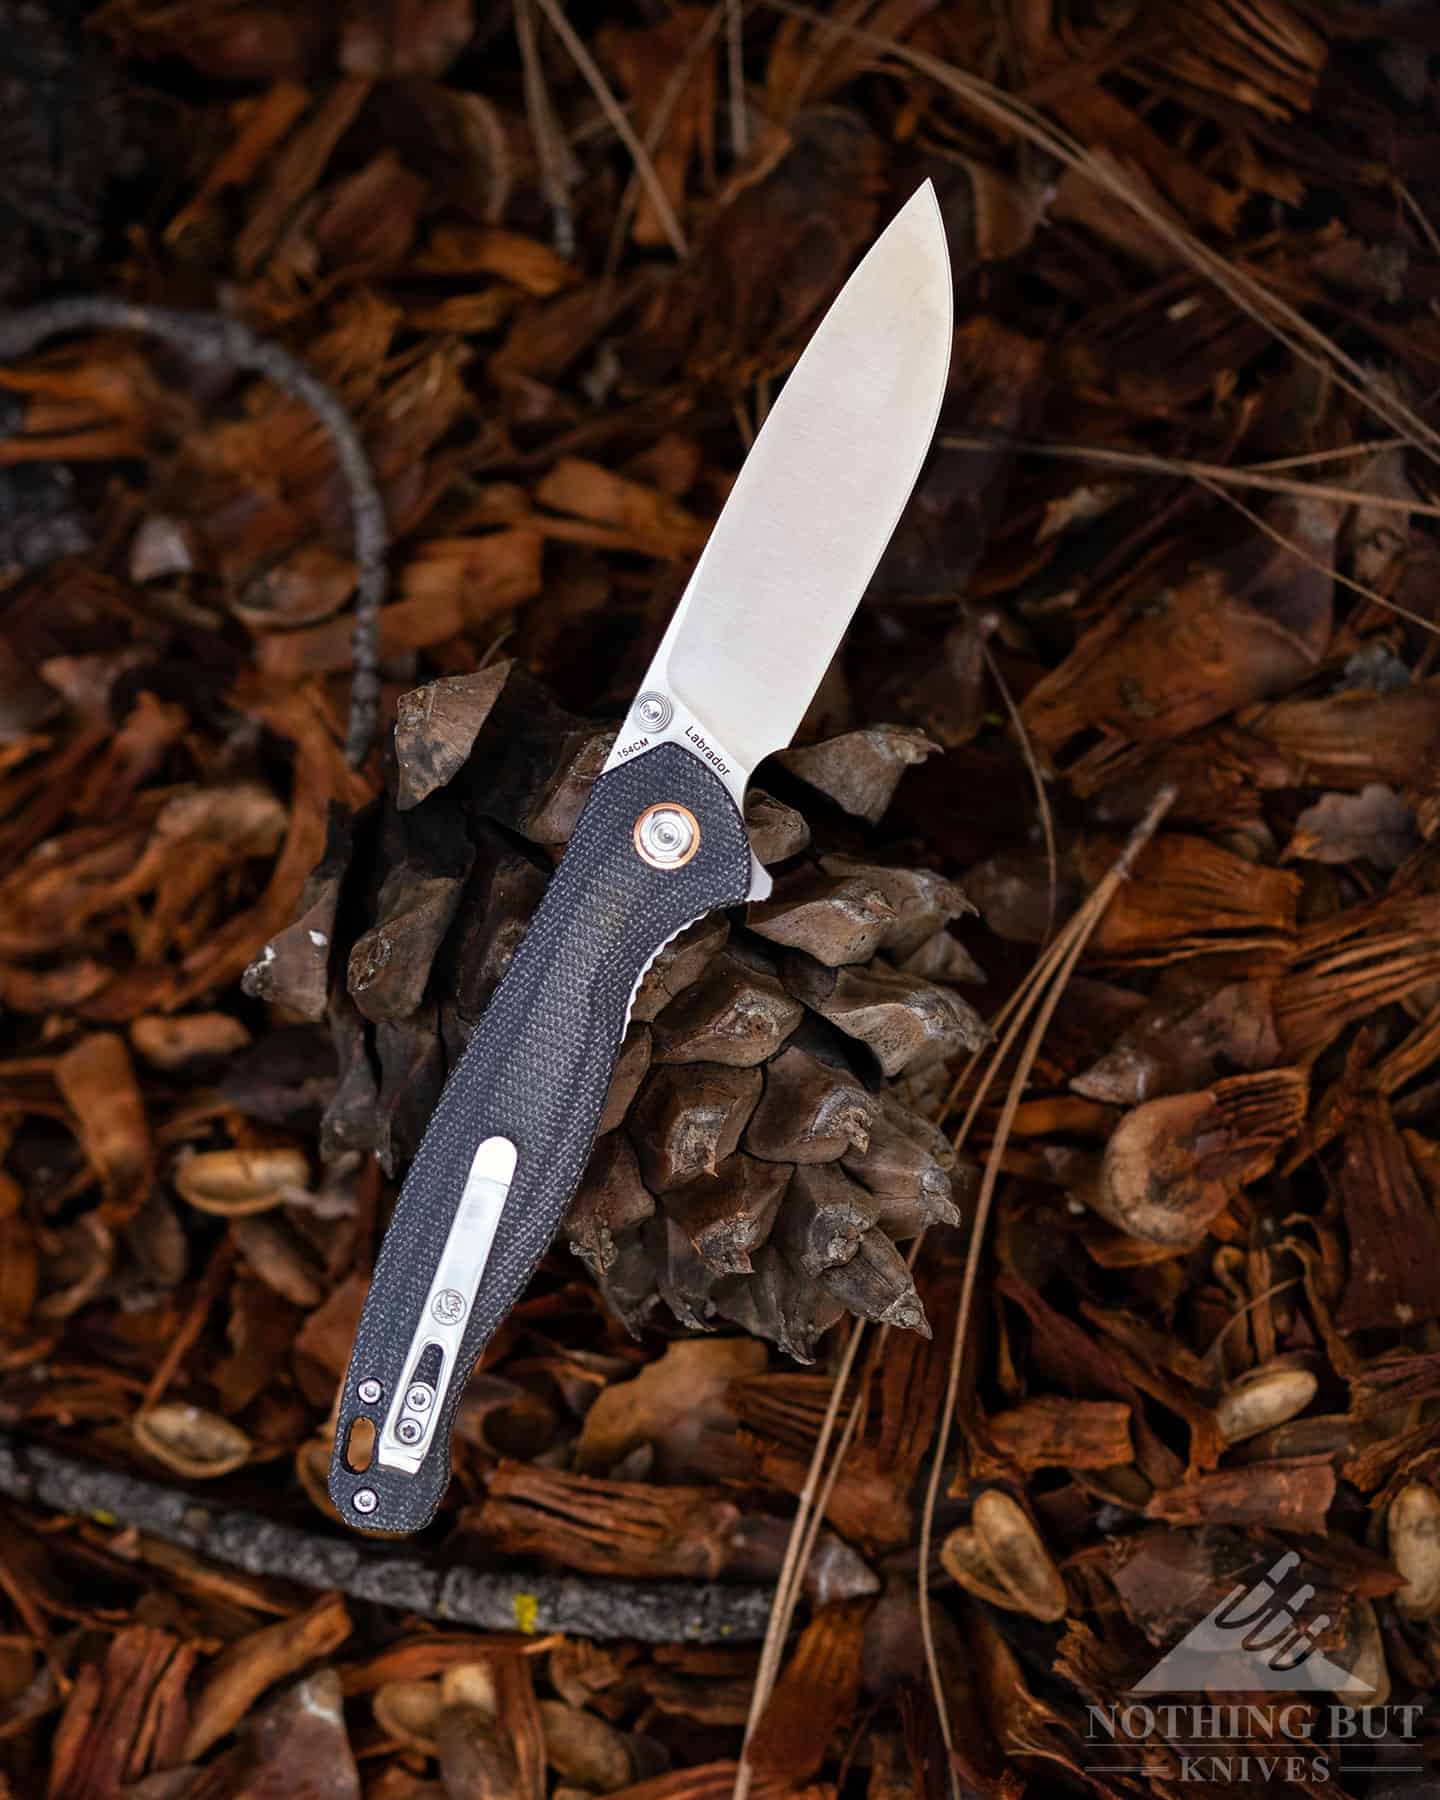 The Labrador—from its ergonomics to the blade grind, is designed to be used.